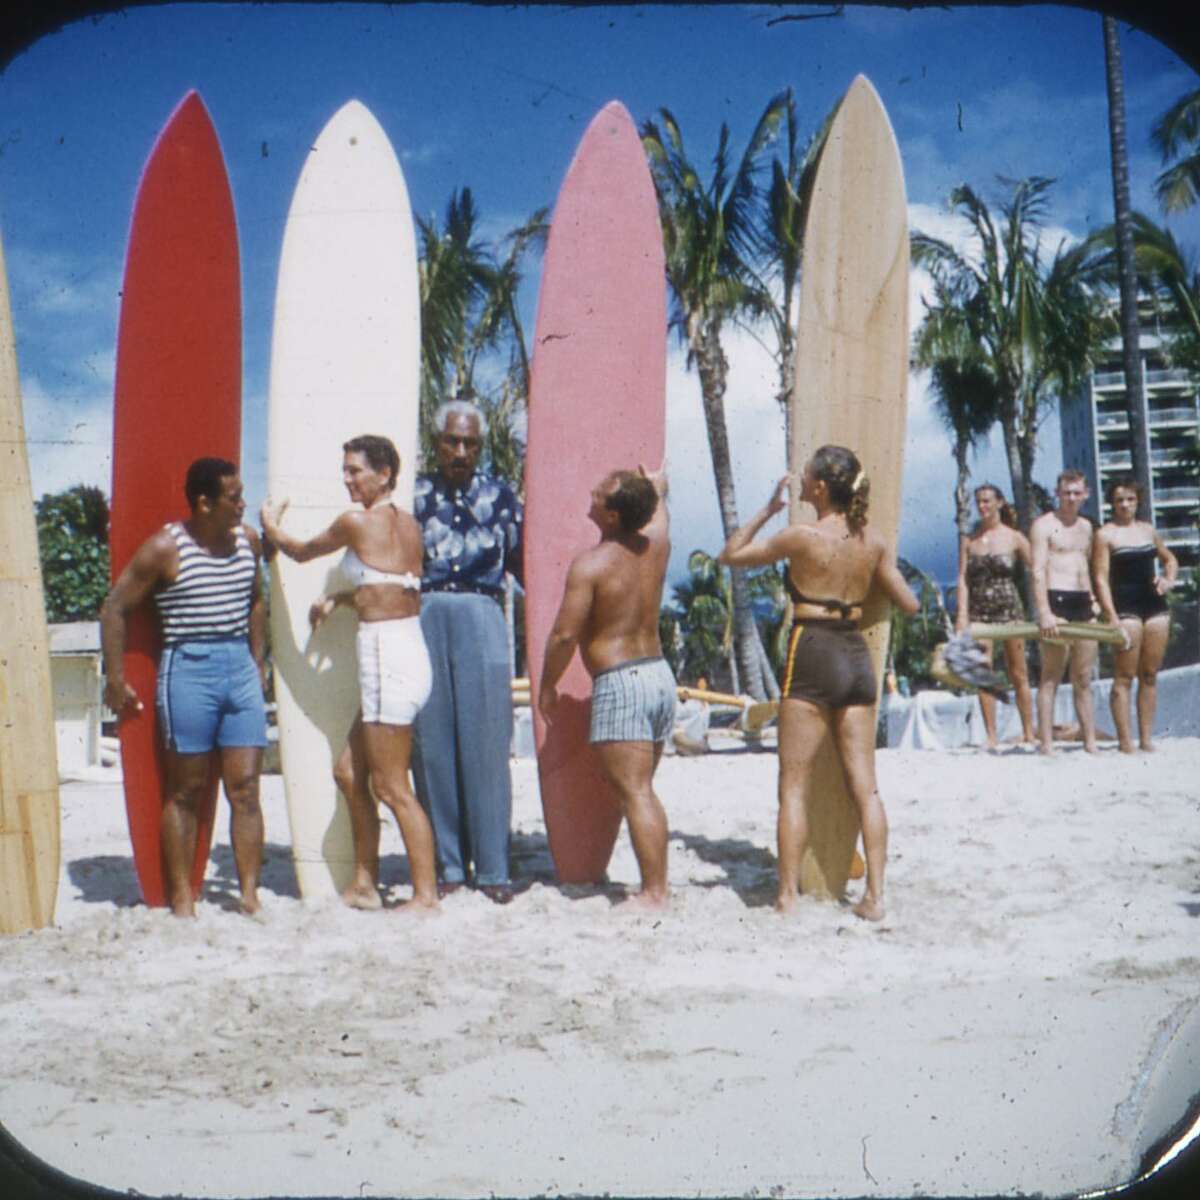 Duke Kahanamoku, center, posing with the first Hawaiian surfing team that competed in an international surfing competition in Lima, Peru. At the competition, Betty Winstedt, standing next to Kahanamoku, took first place in the women's division.